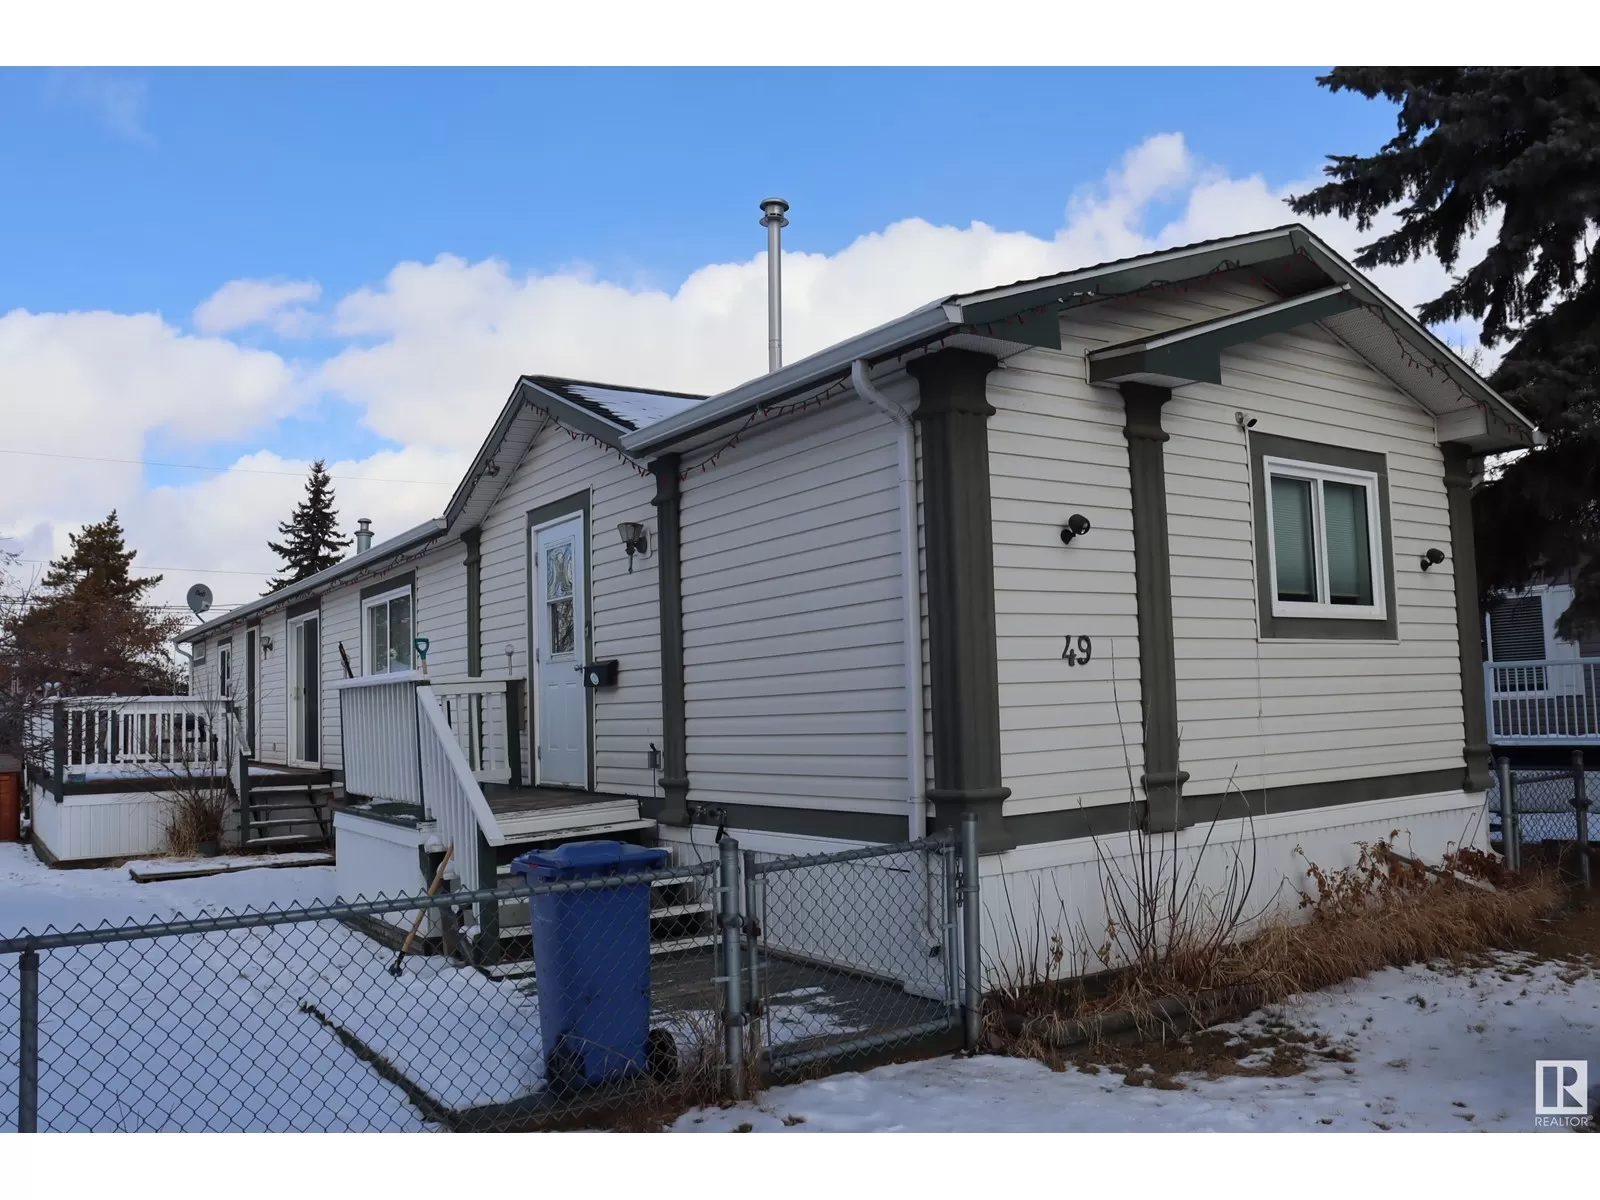 Mobile Home for rent: #49 4204 47 St, Wetaskiwin, Alberta T9A 2H5